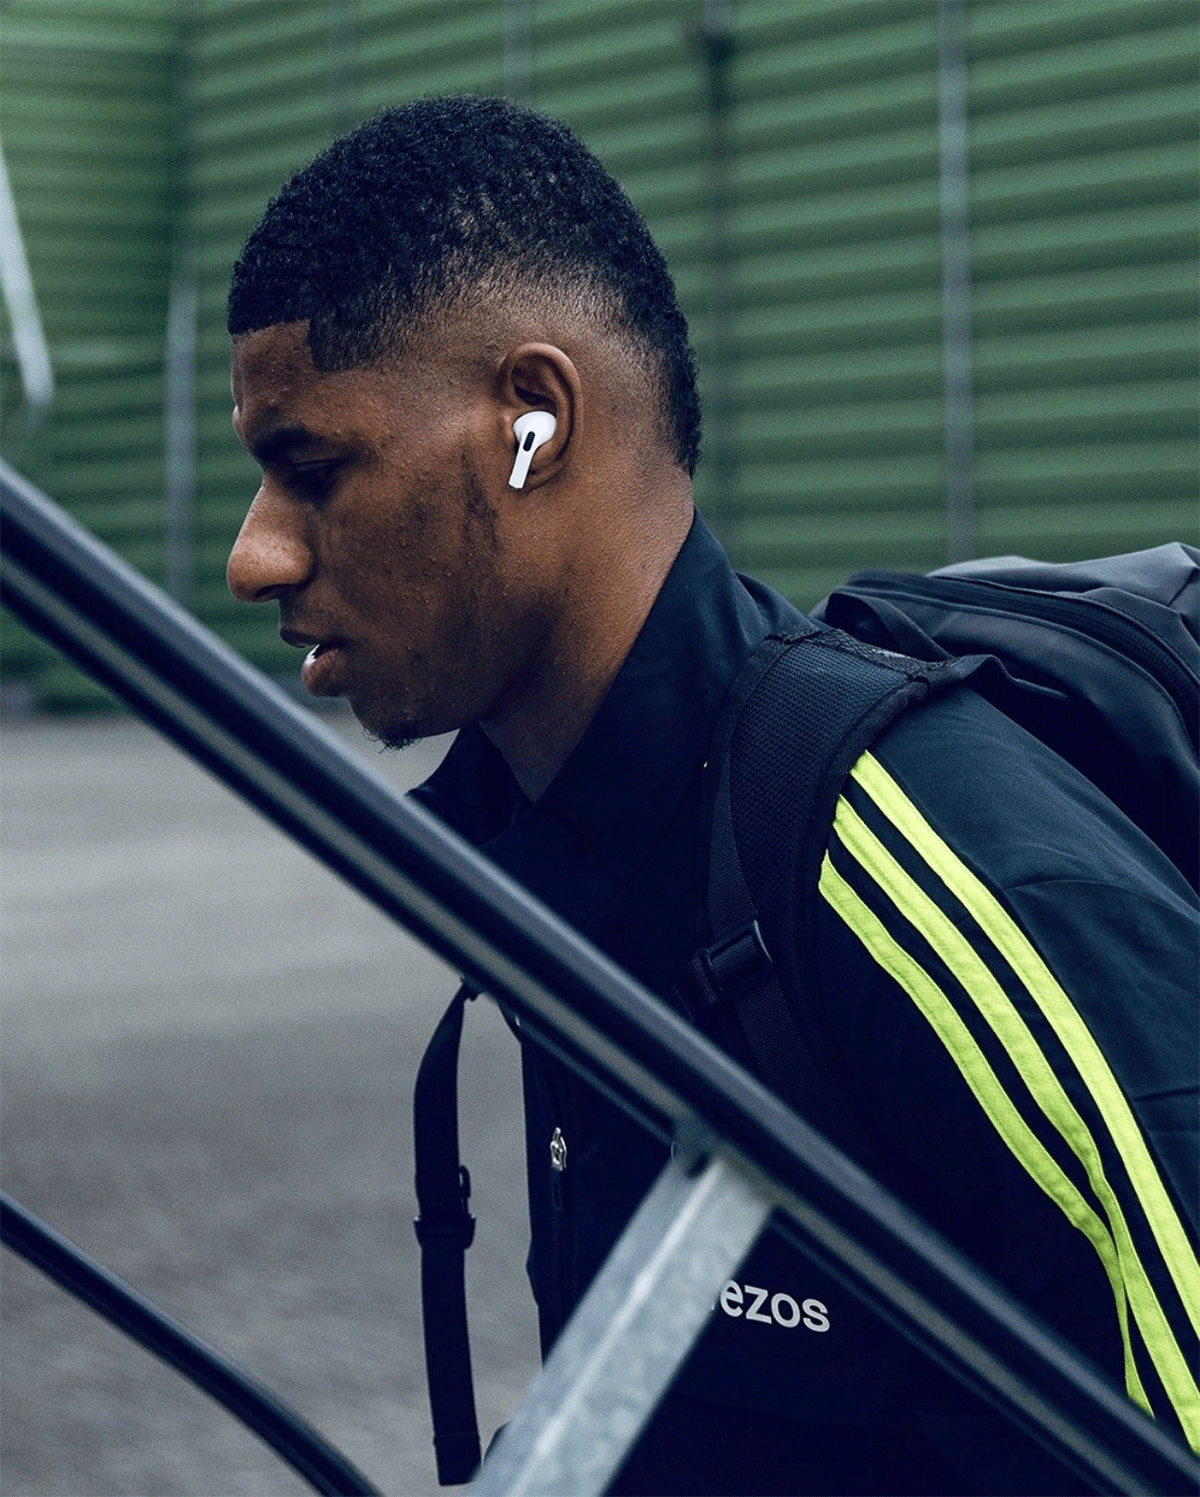 Marcus Rashford last appeared as a substitute in the EURO 2020 final last July